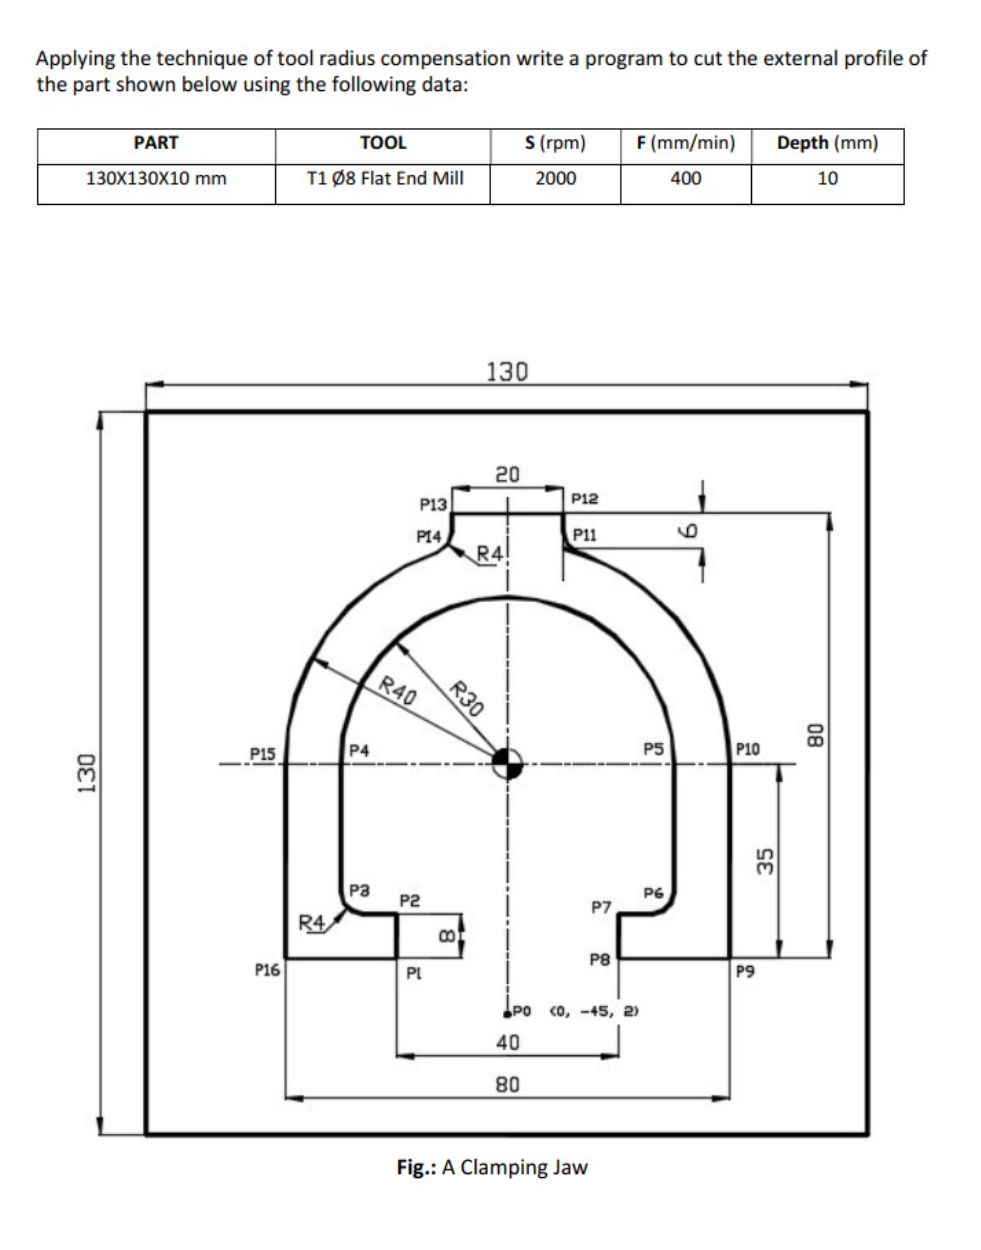 Applying the technique of tool radius compensation write a program to cut the external profile of
the part shown below using the following data:
PART
TOOL
S (rpm)
Depth (mm)
F (mm/min)
400
130X130X10 mm
T1 08 Flat End Mill
2000
10
9
130
P15
P16
R4
P4
P3
P13
P14
R40
P2
PL
R30
8
130
20
R4!
P12
P11
P7
P8
PO (0, -45, 2)
40
80
Fig.: A Clamping Jaw
P5
P6
P10
35
P9
08